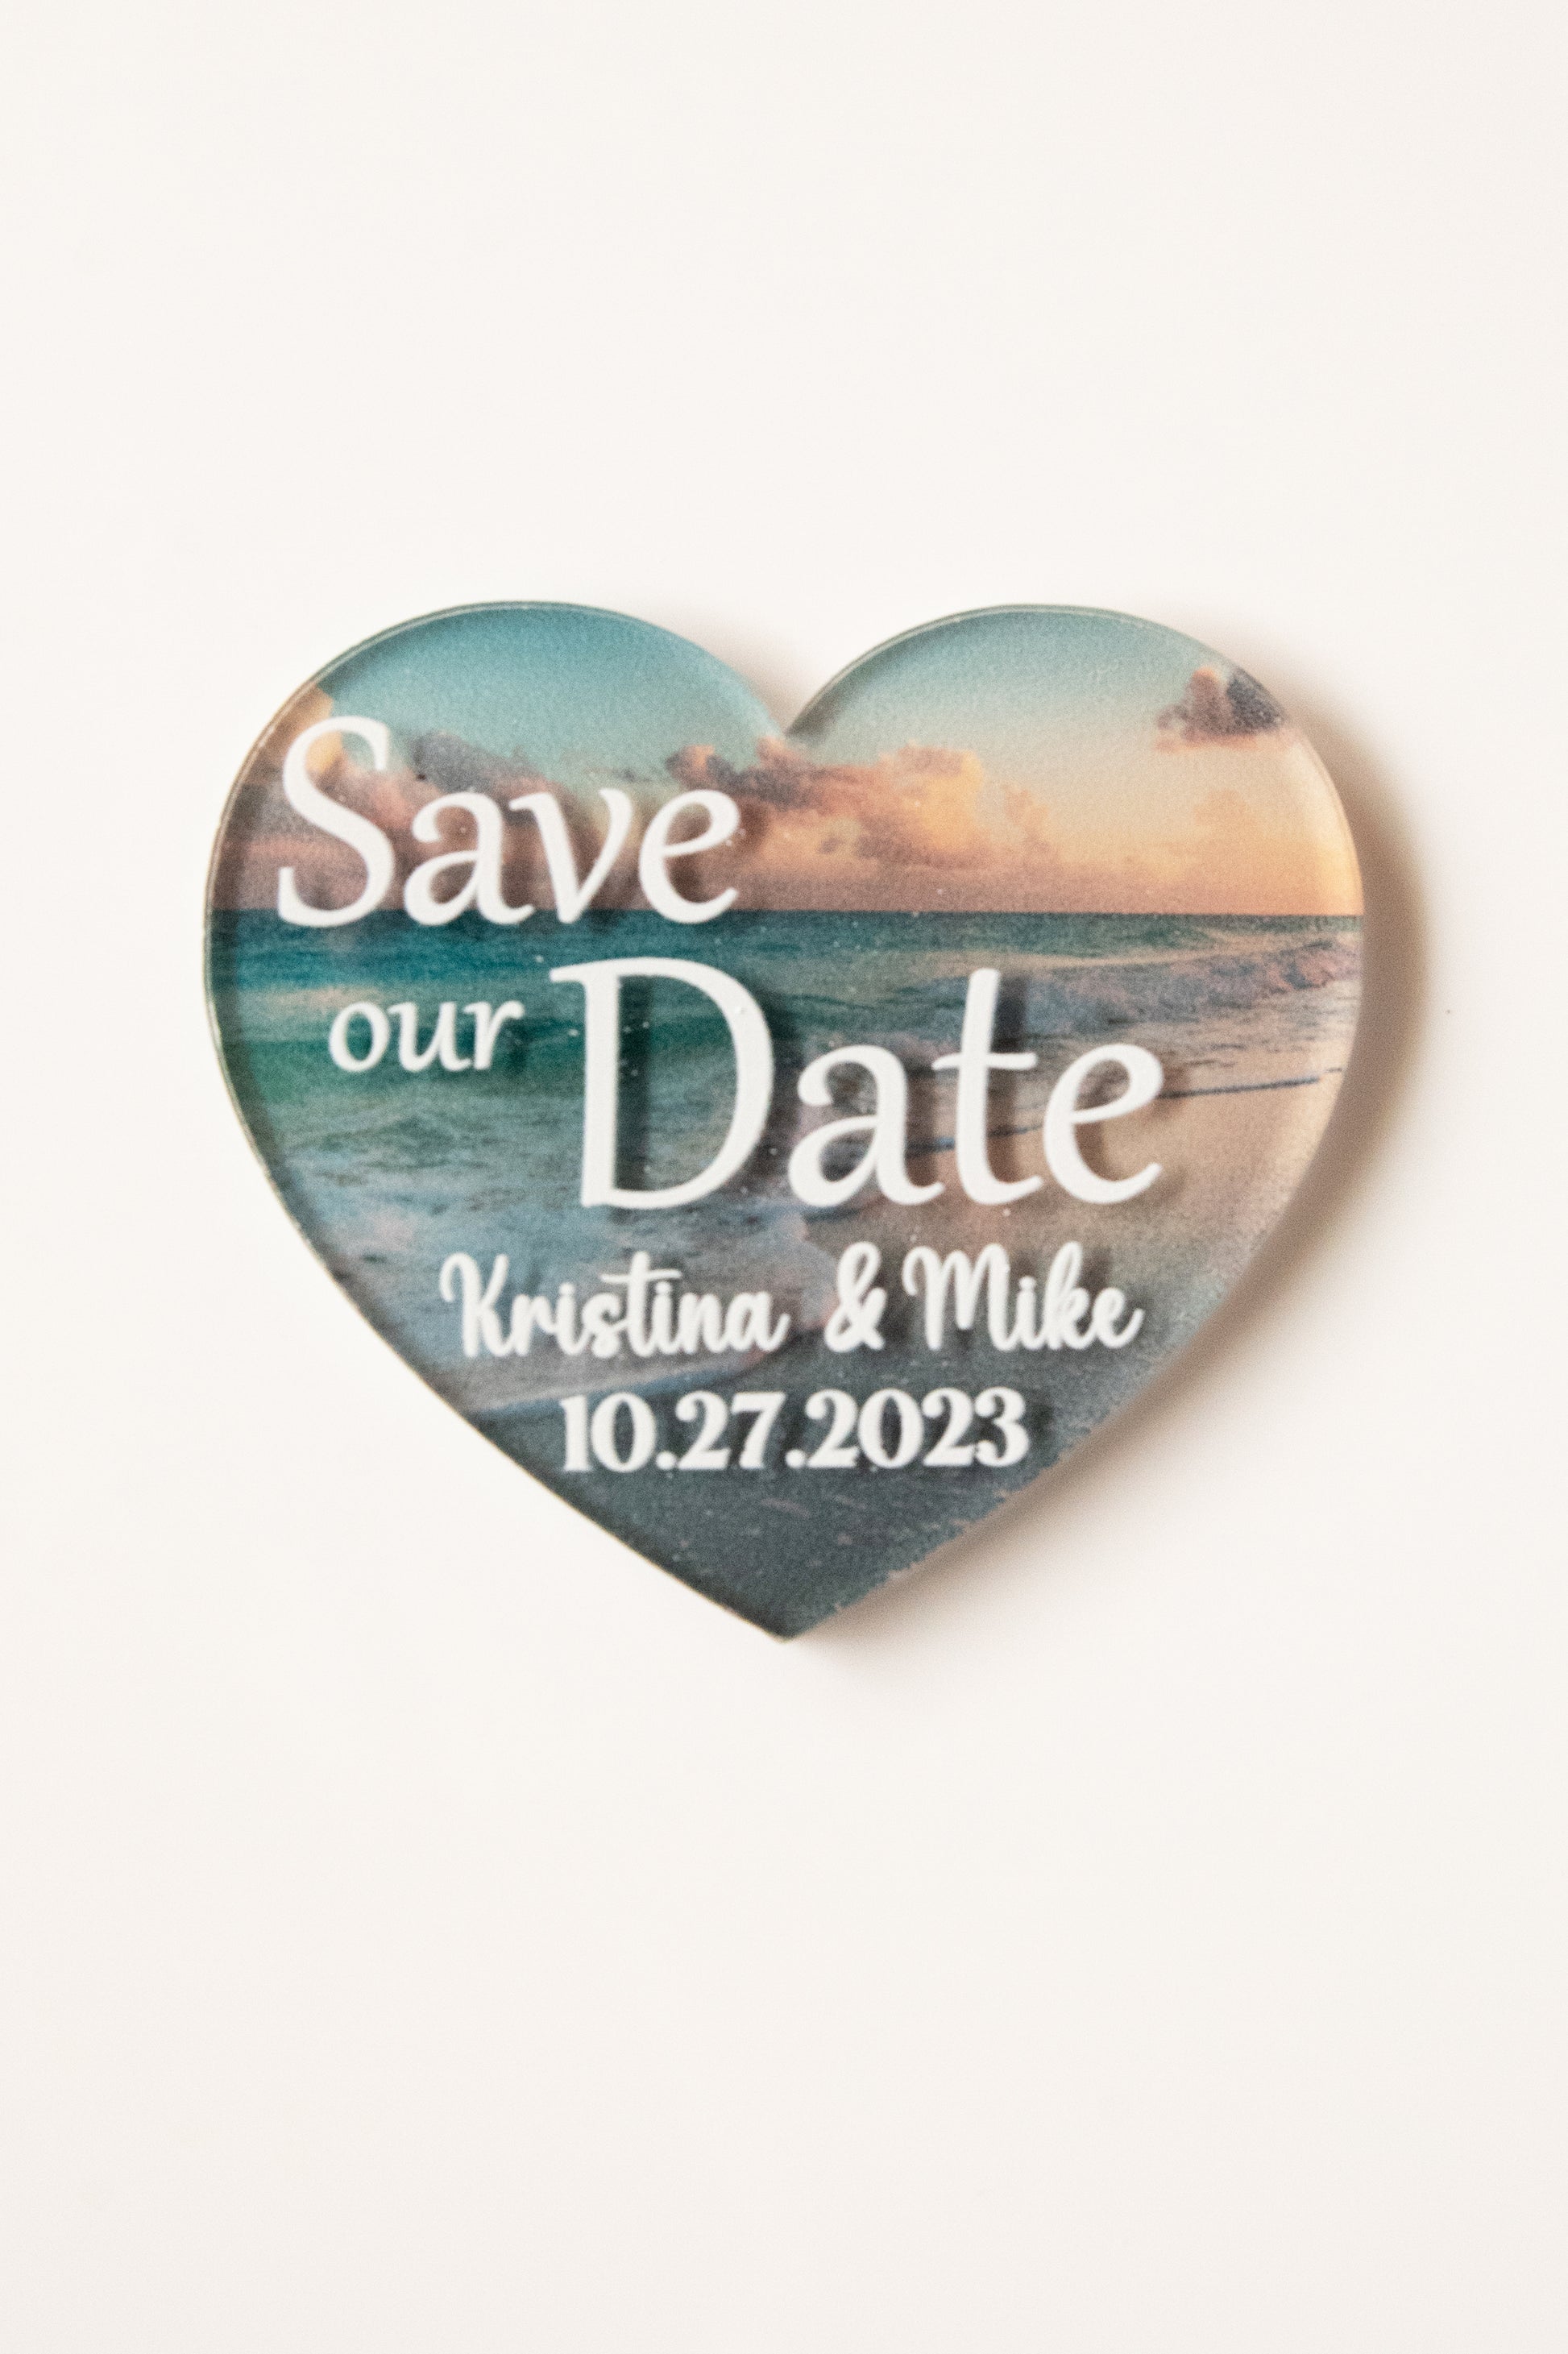 Personalized Heart-Shaped Acrylic Save the Date Magnets - Add a